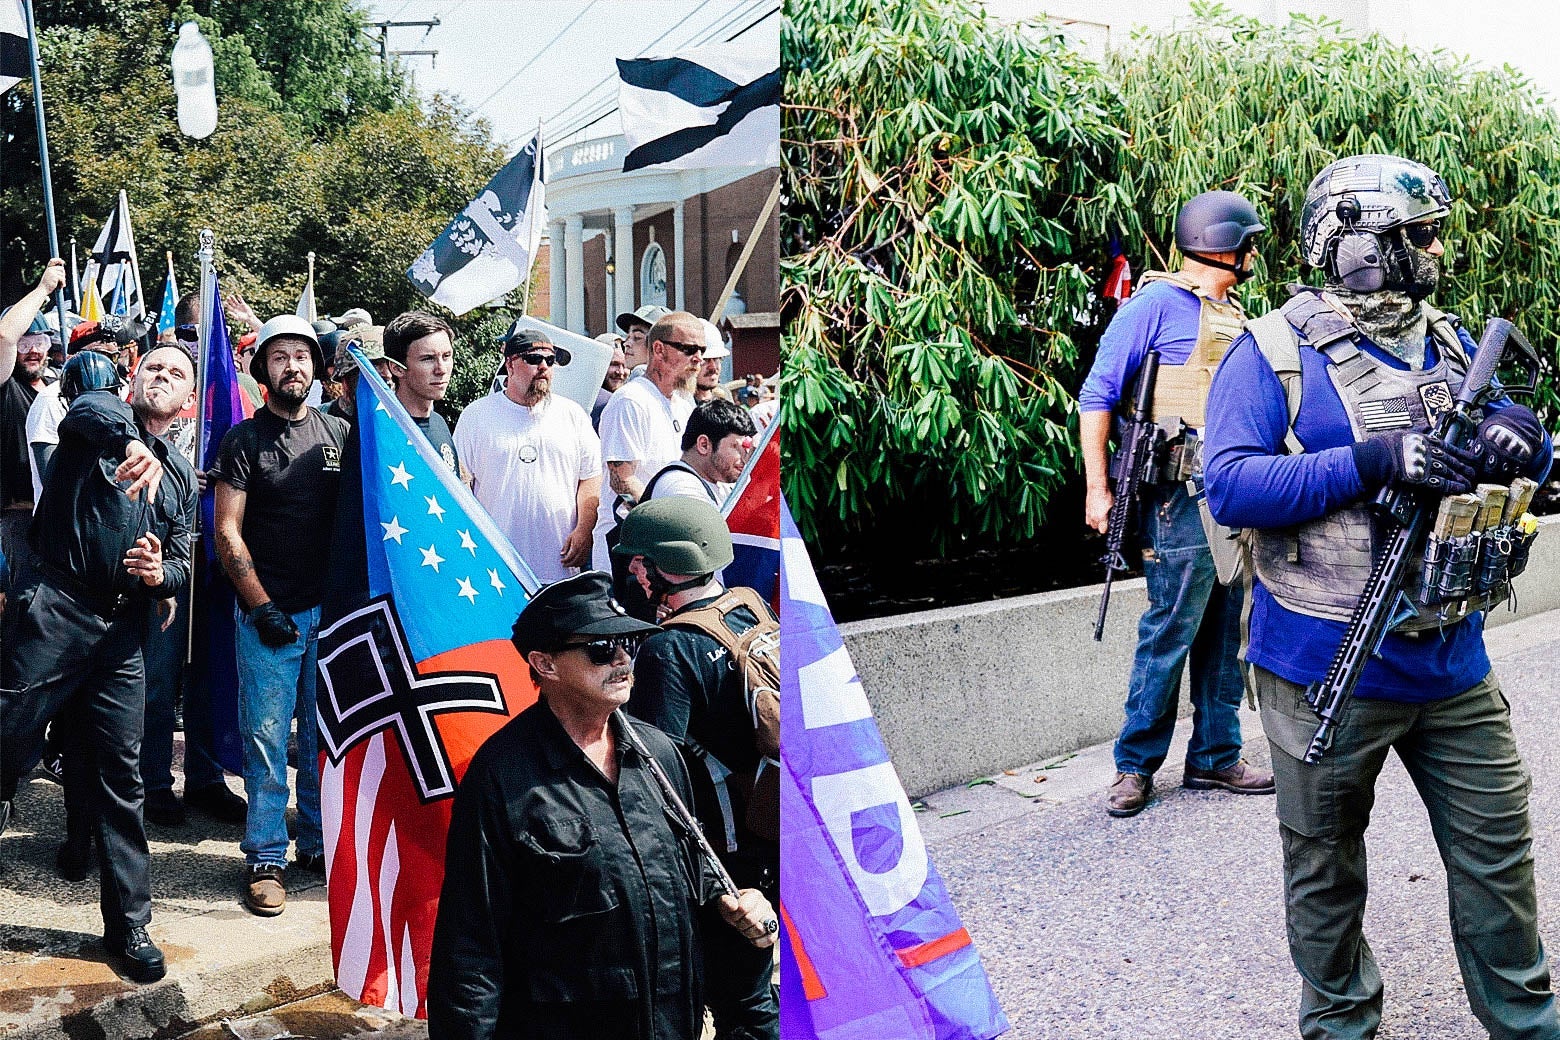 A scene from the "Unite the Right" rally in Charlottesville is seen side by side with a scene from a far-right protest in Portland.